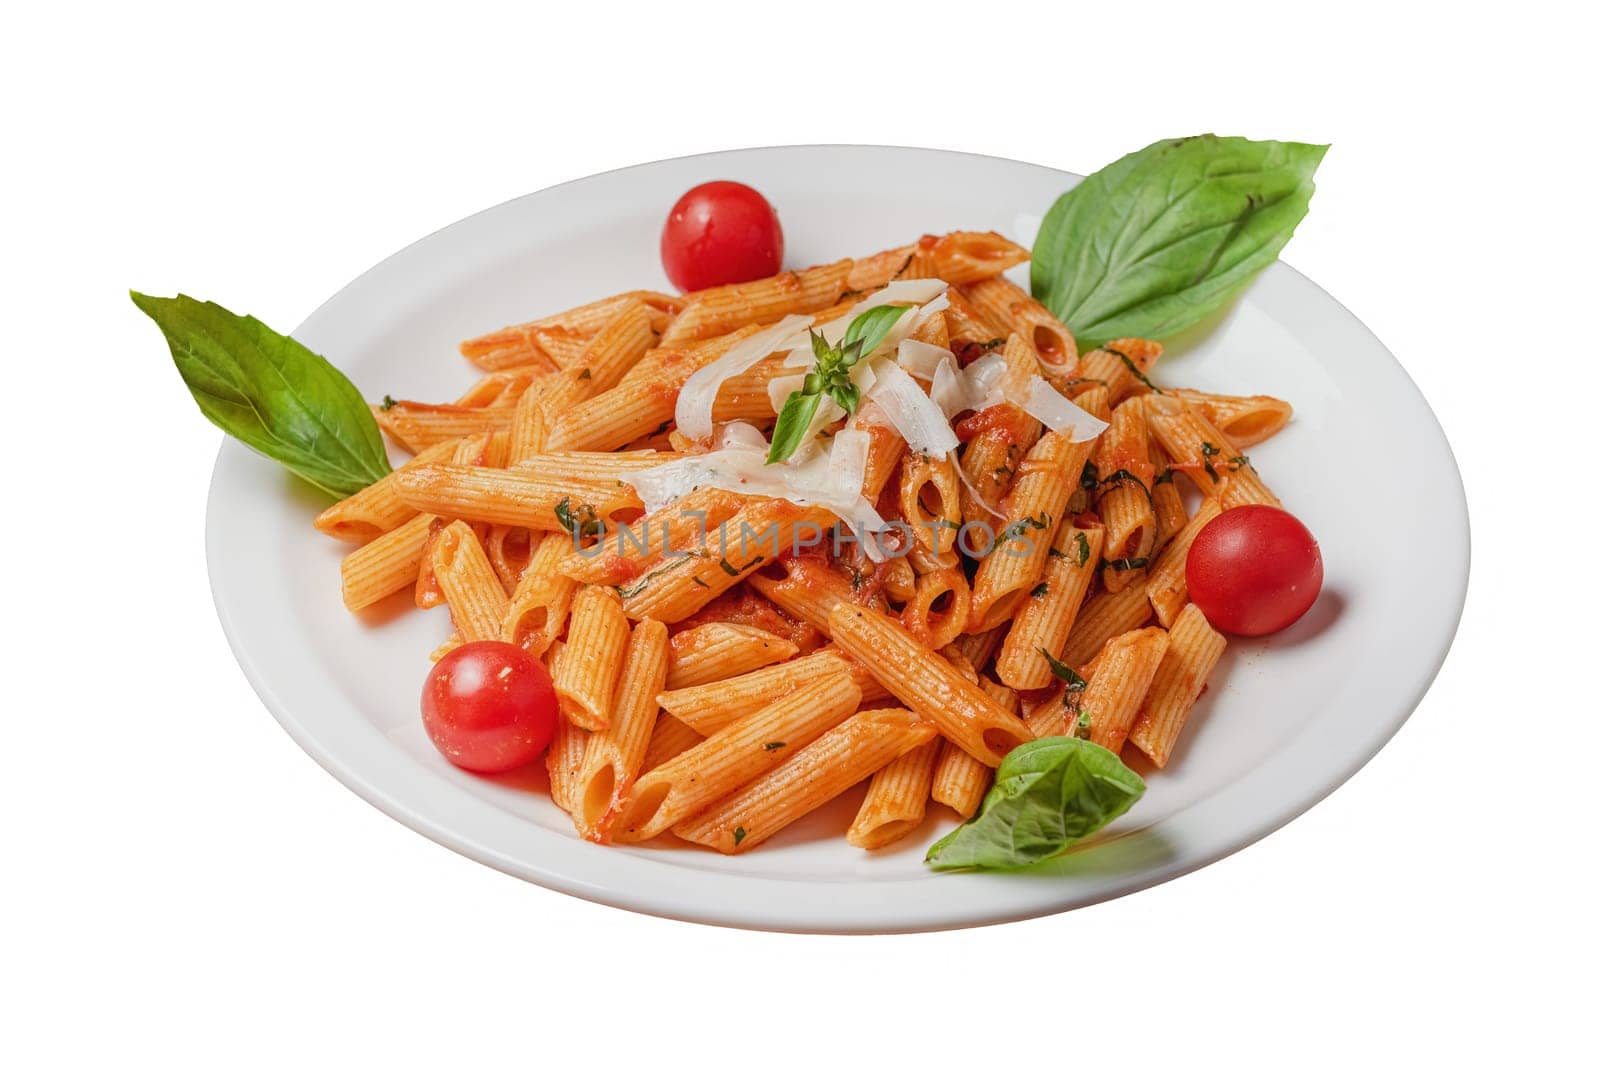 Pasta served with cheese on white background